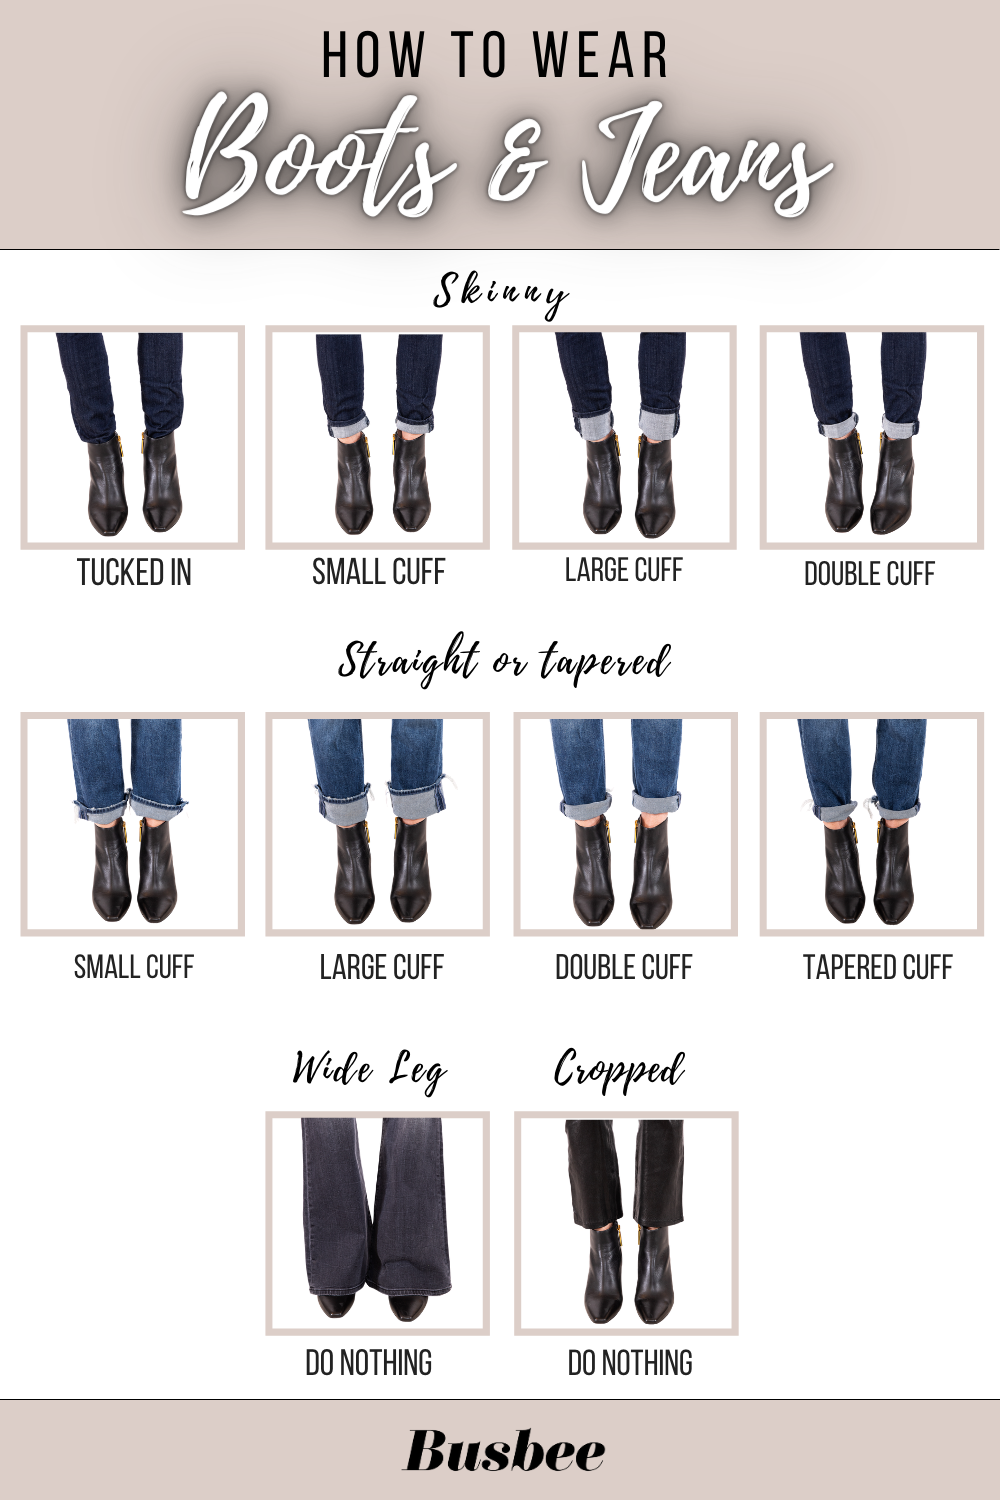 Erin Busbee of Busbee Style- Fashion over 40 illustrates how to wear boot and booties with different styles of denim including skinny jeans, straight or tapered jeans, wide leg jeans, and Cropped. 